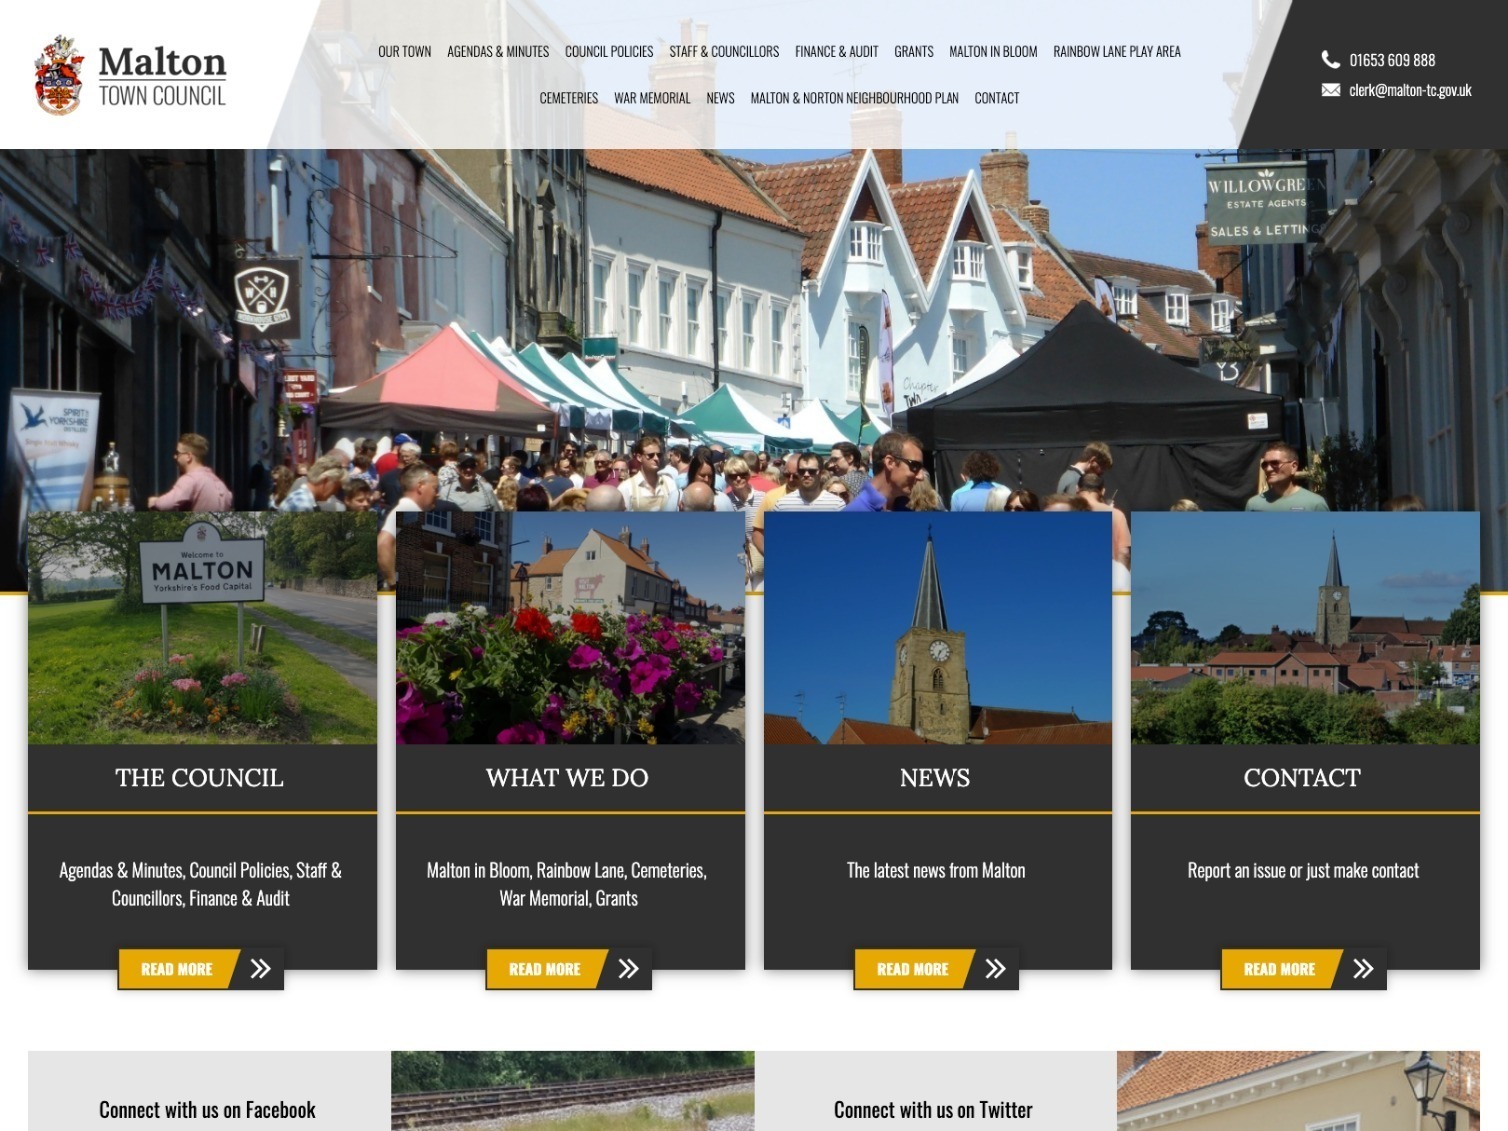 The Malton town council website, created by it'seeze